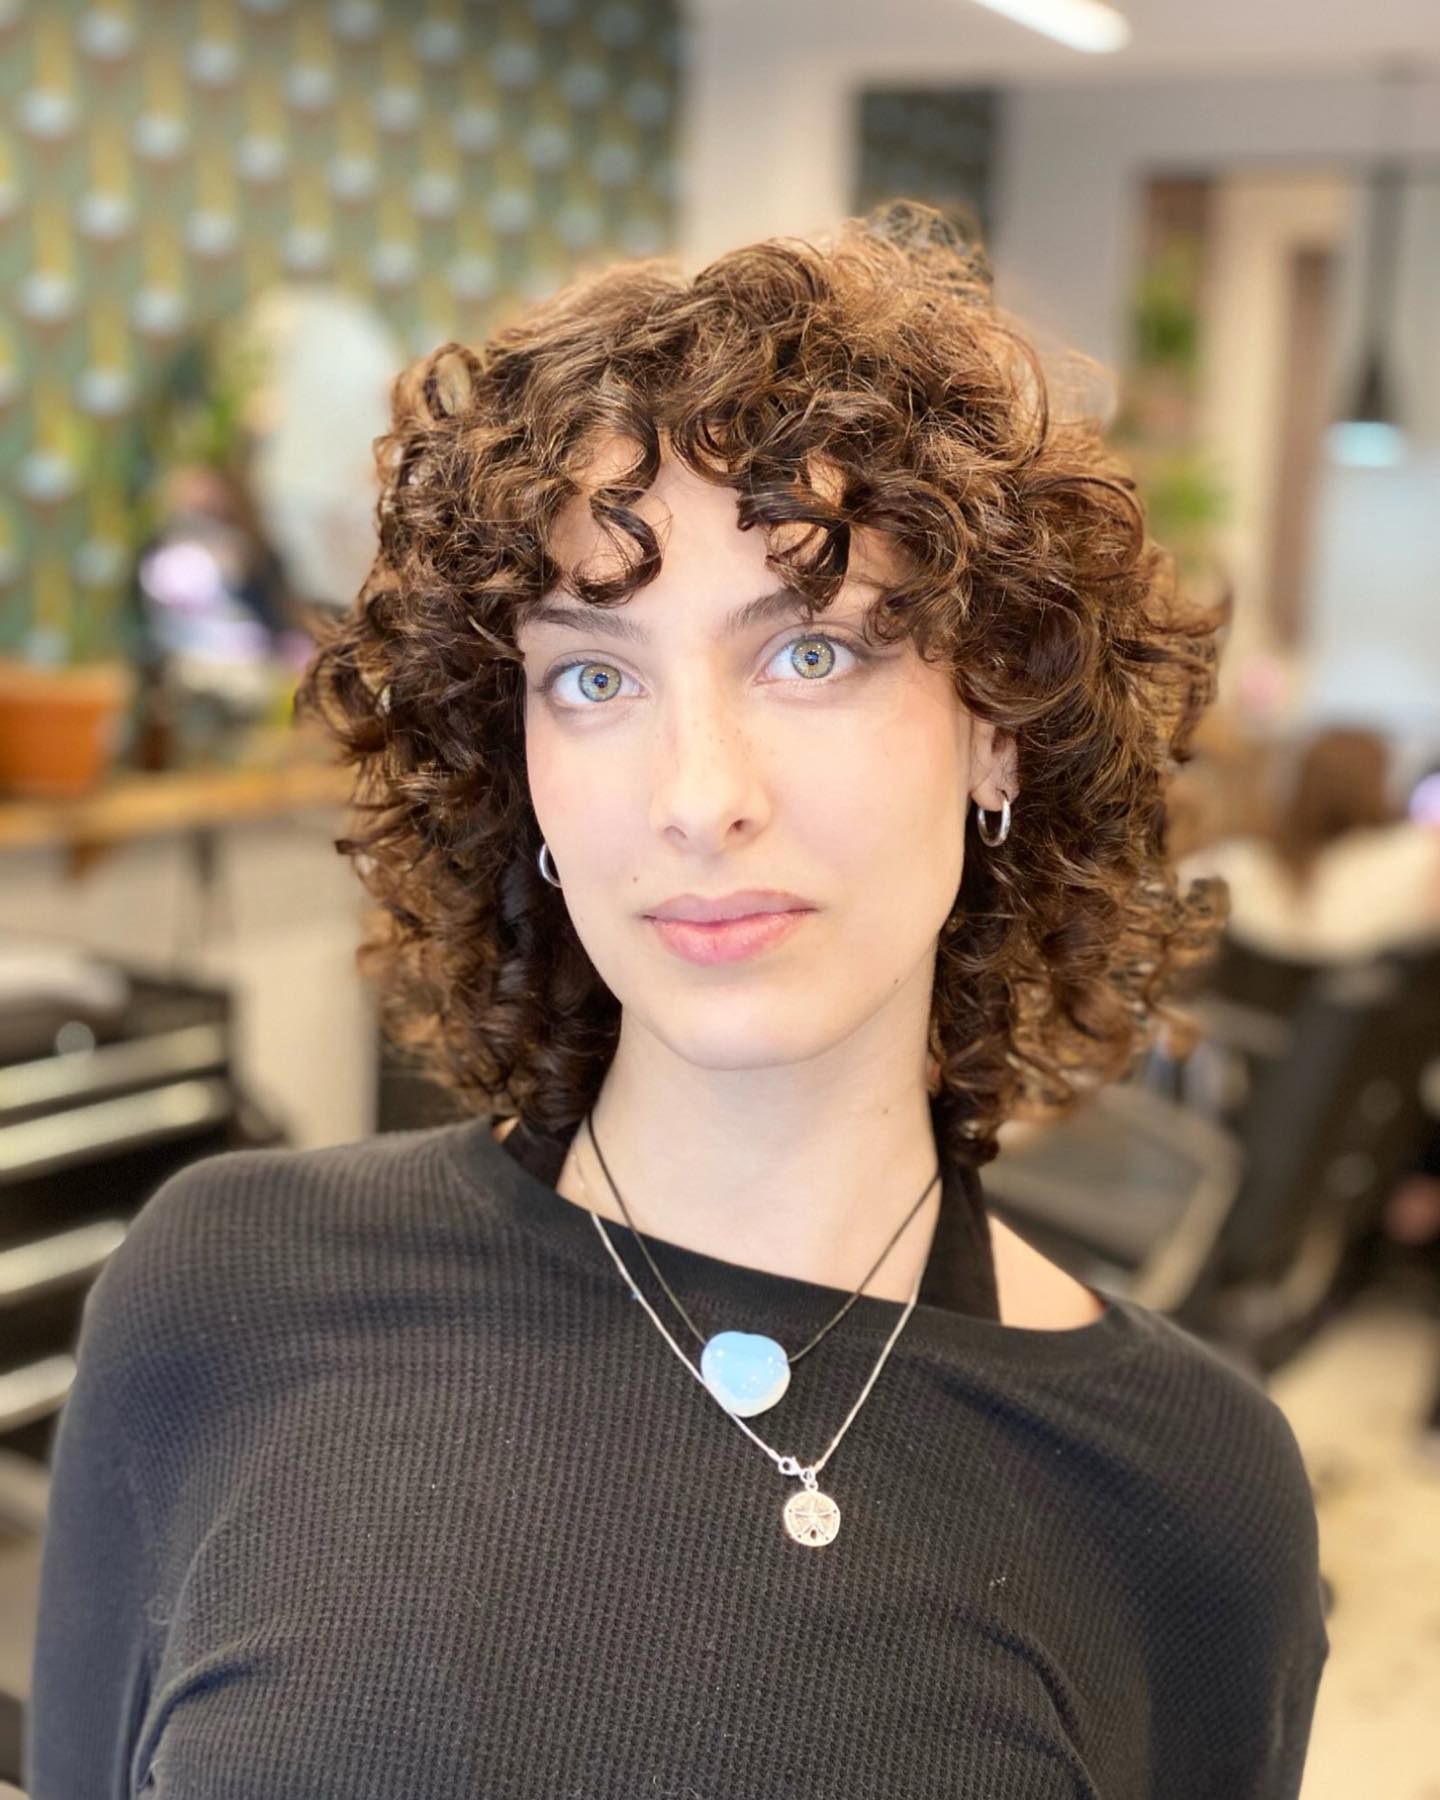 Curly Shag Hairstyle 56 Curly hair shaggy bob | Curly shag mullet | Medium length curly shags Curly Shag Hairstyles for Women